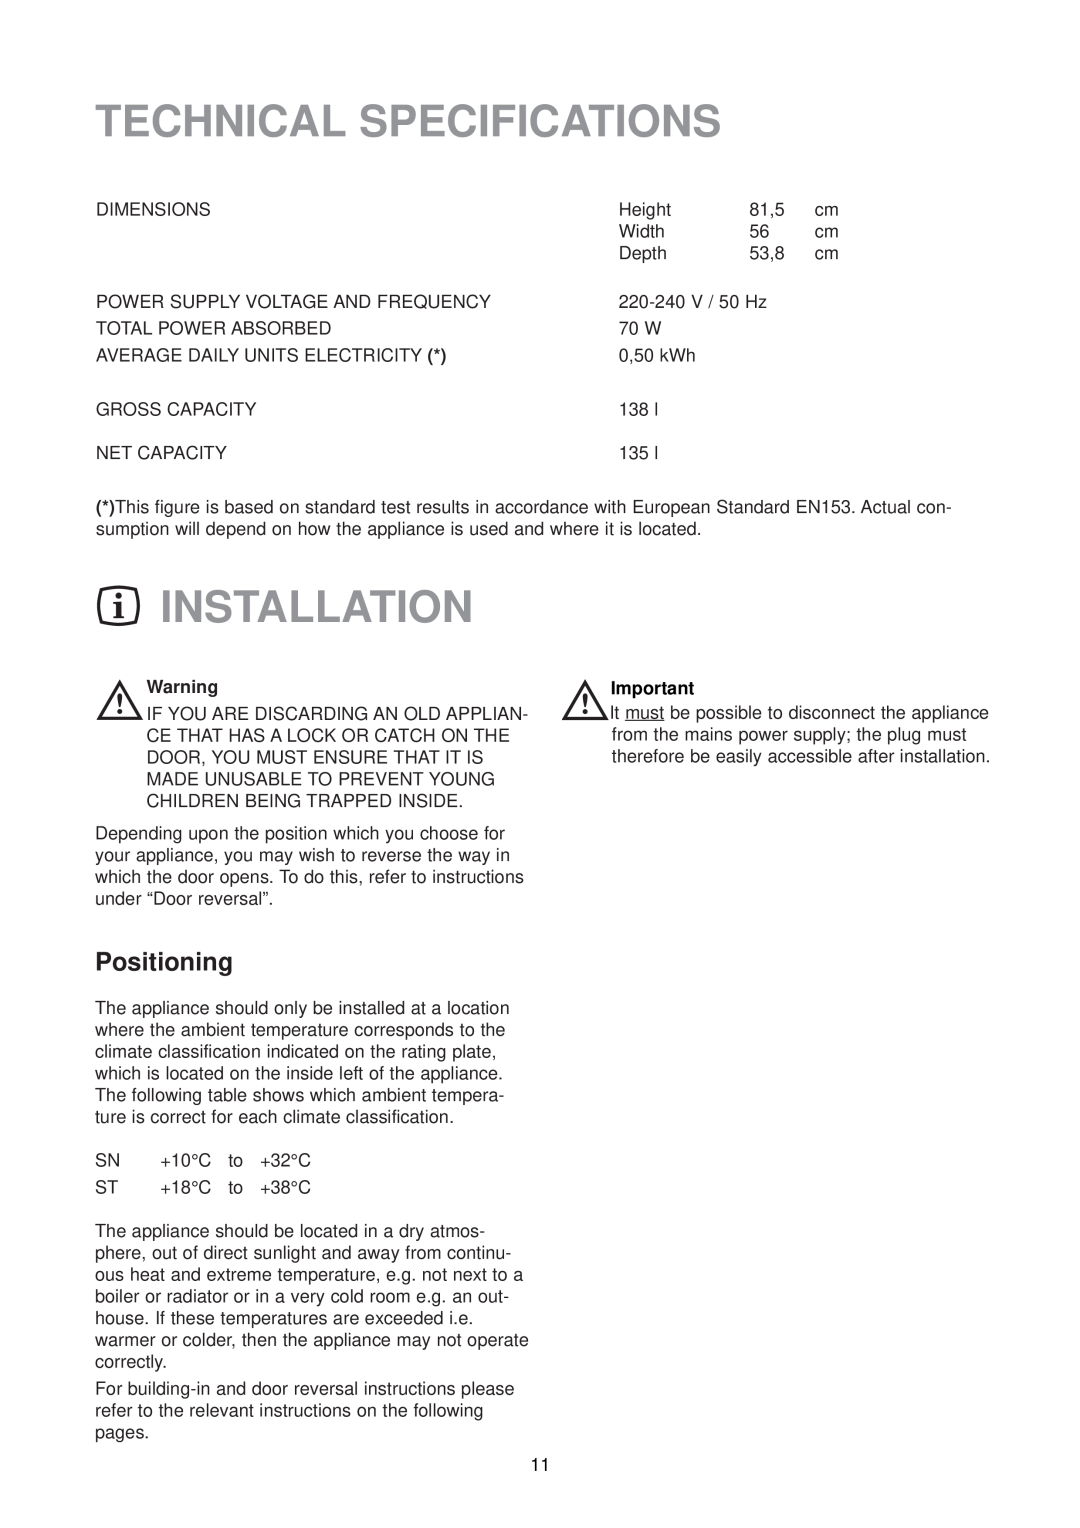 Zanussi ZU 9155 manual Technical Specifications, Installation, Positioning 